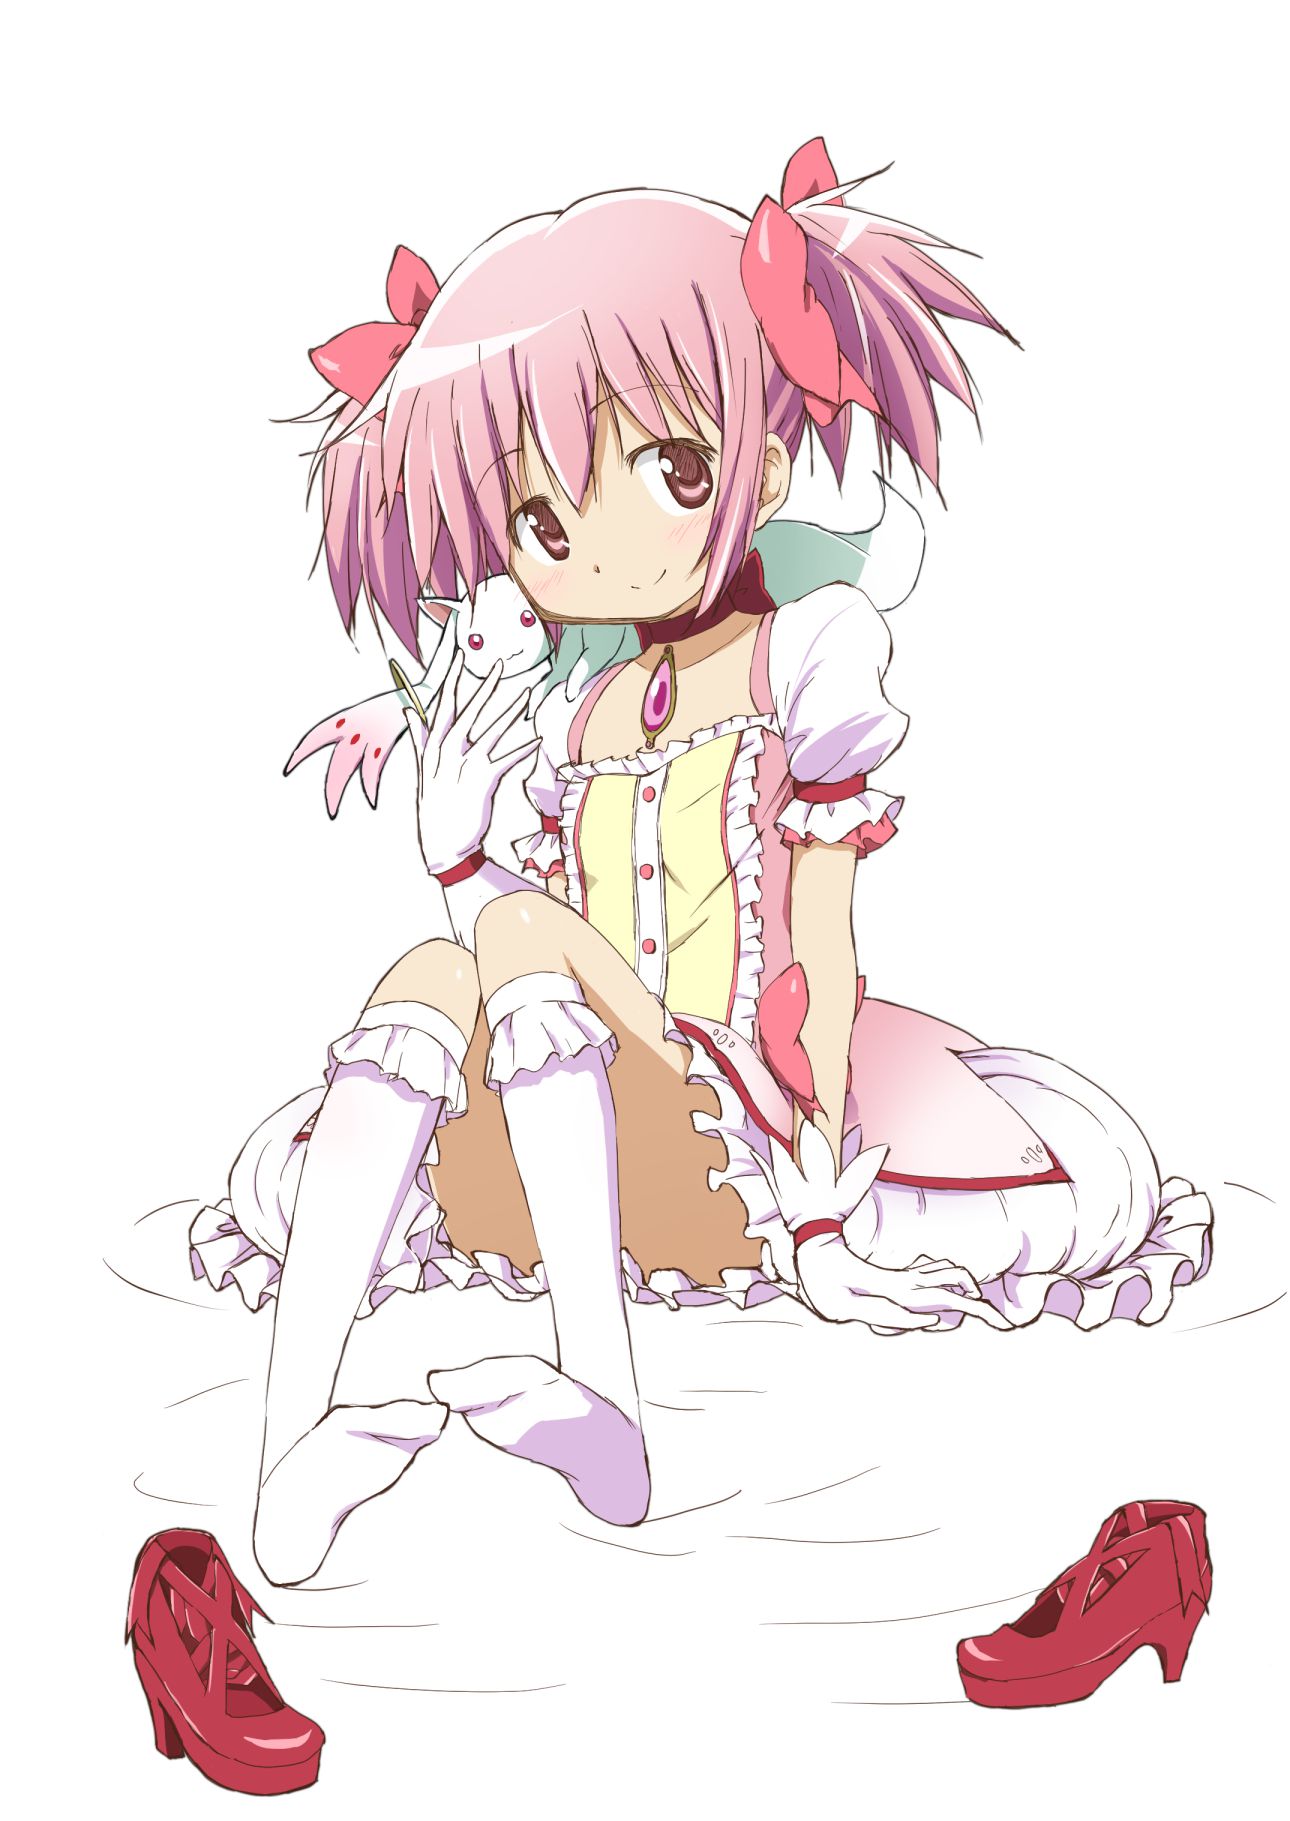 Kaname Madoka "I do not see it with naughty eyes because it is a magical girl..." ← This W, W, W 1